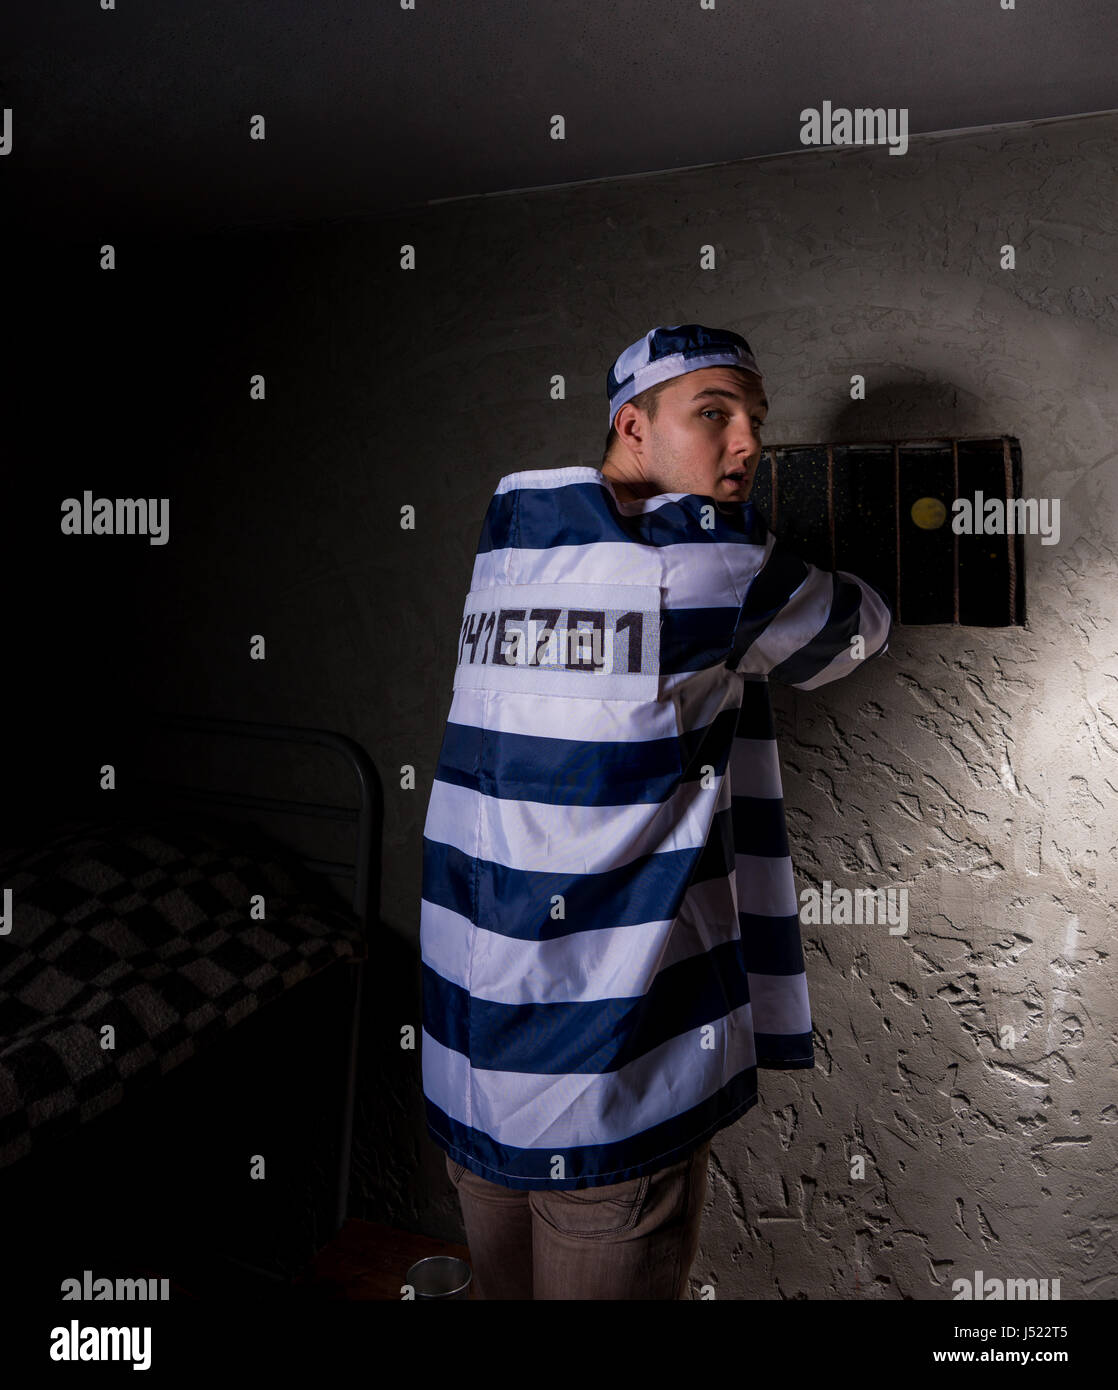 Prisoner wearing prison uniform looked back while trying to escape through the window with bars in a small dark prison cell Stock Photo